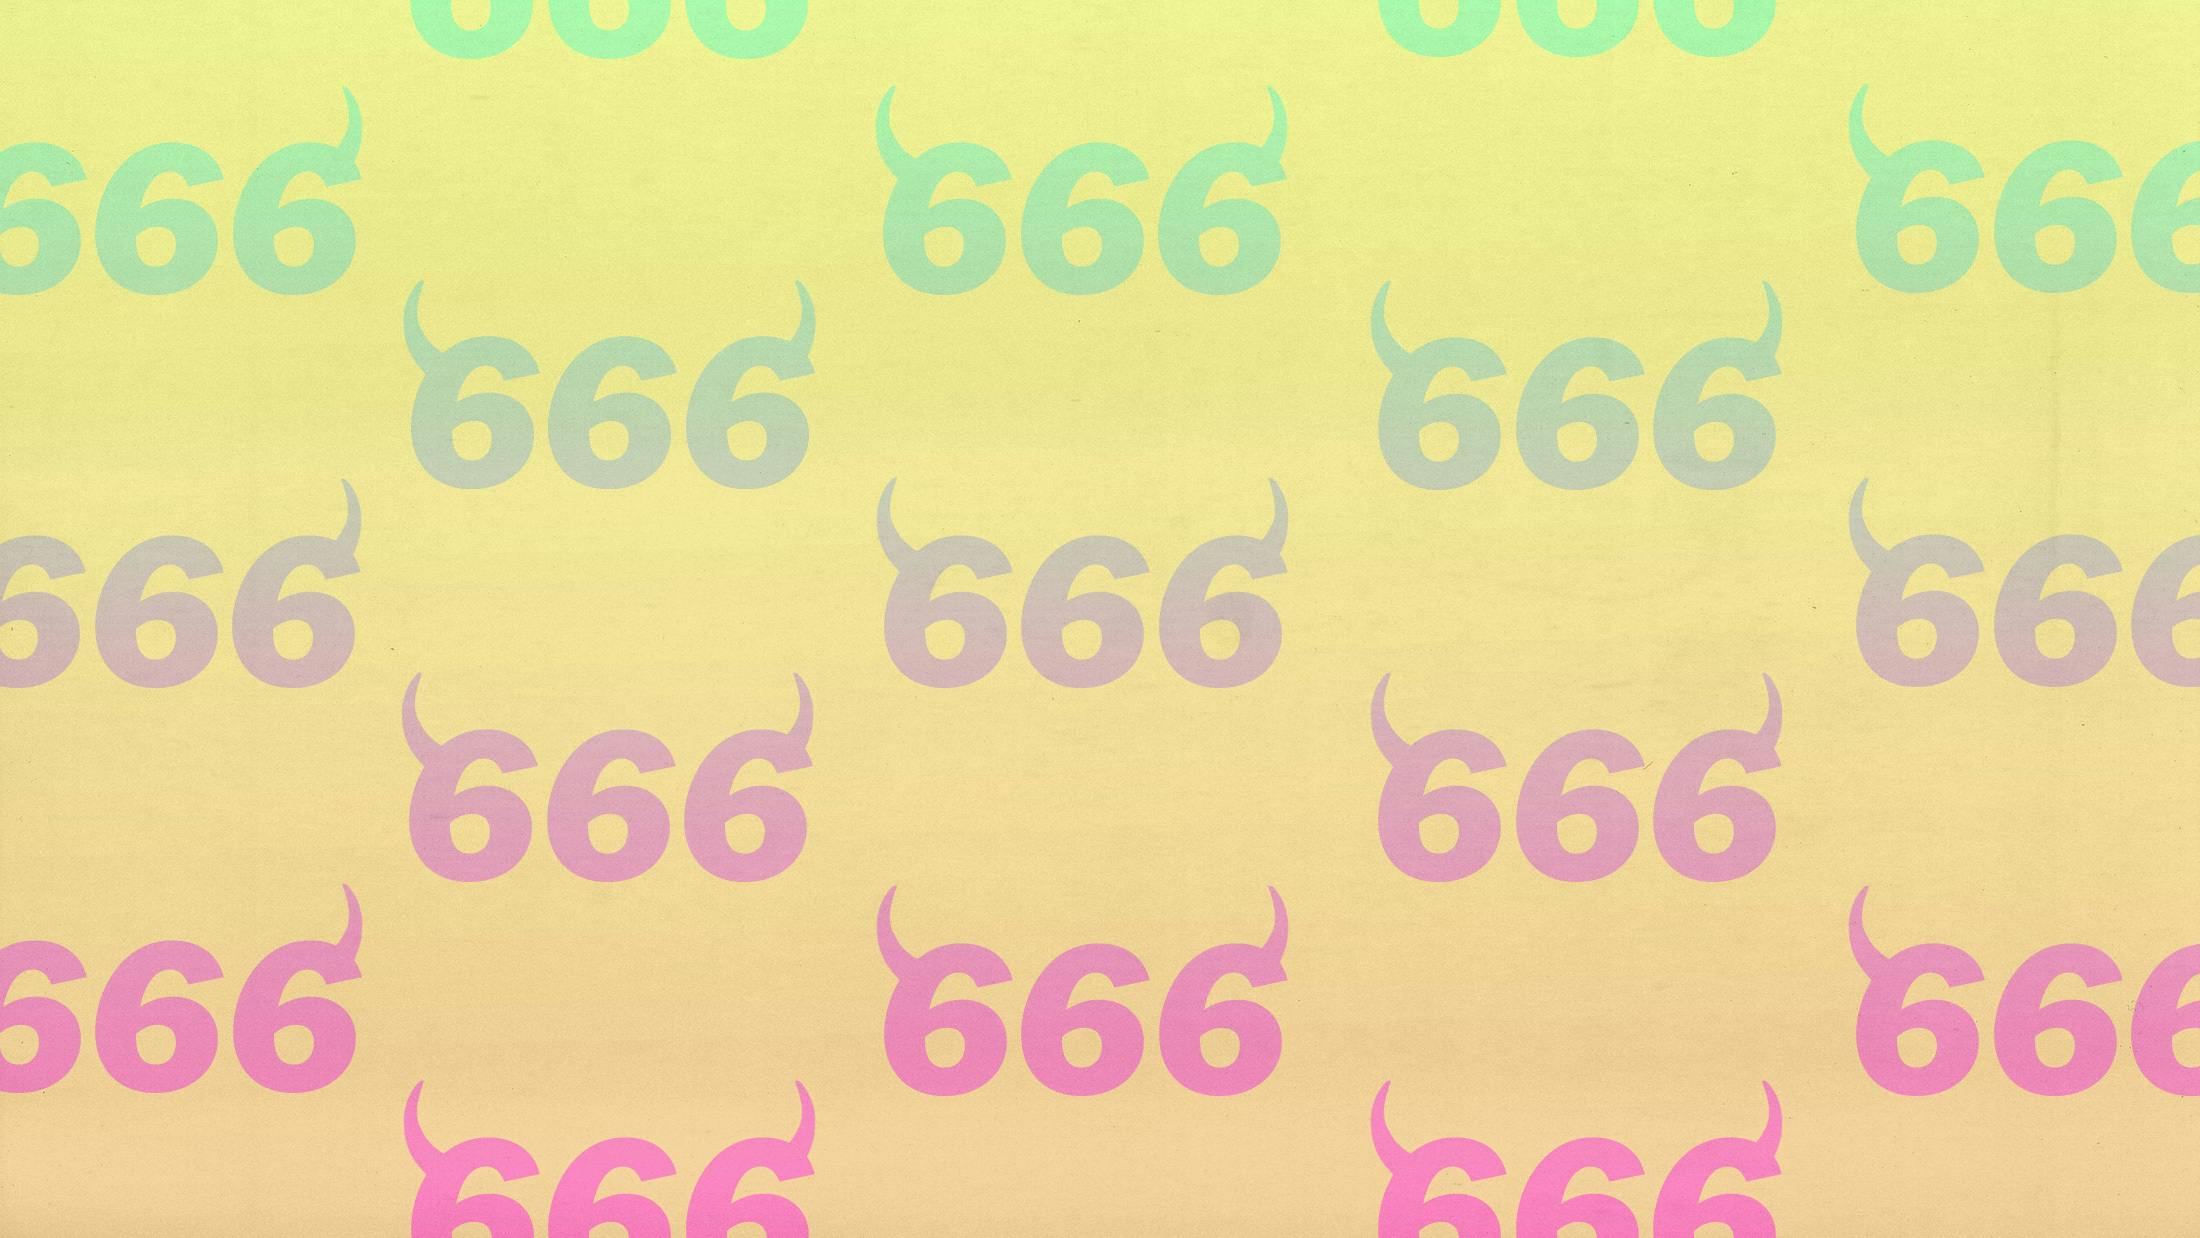 Why are we so fascinated by the number 666?